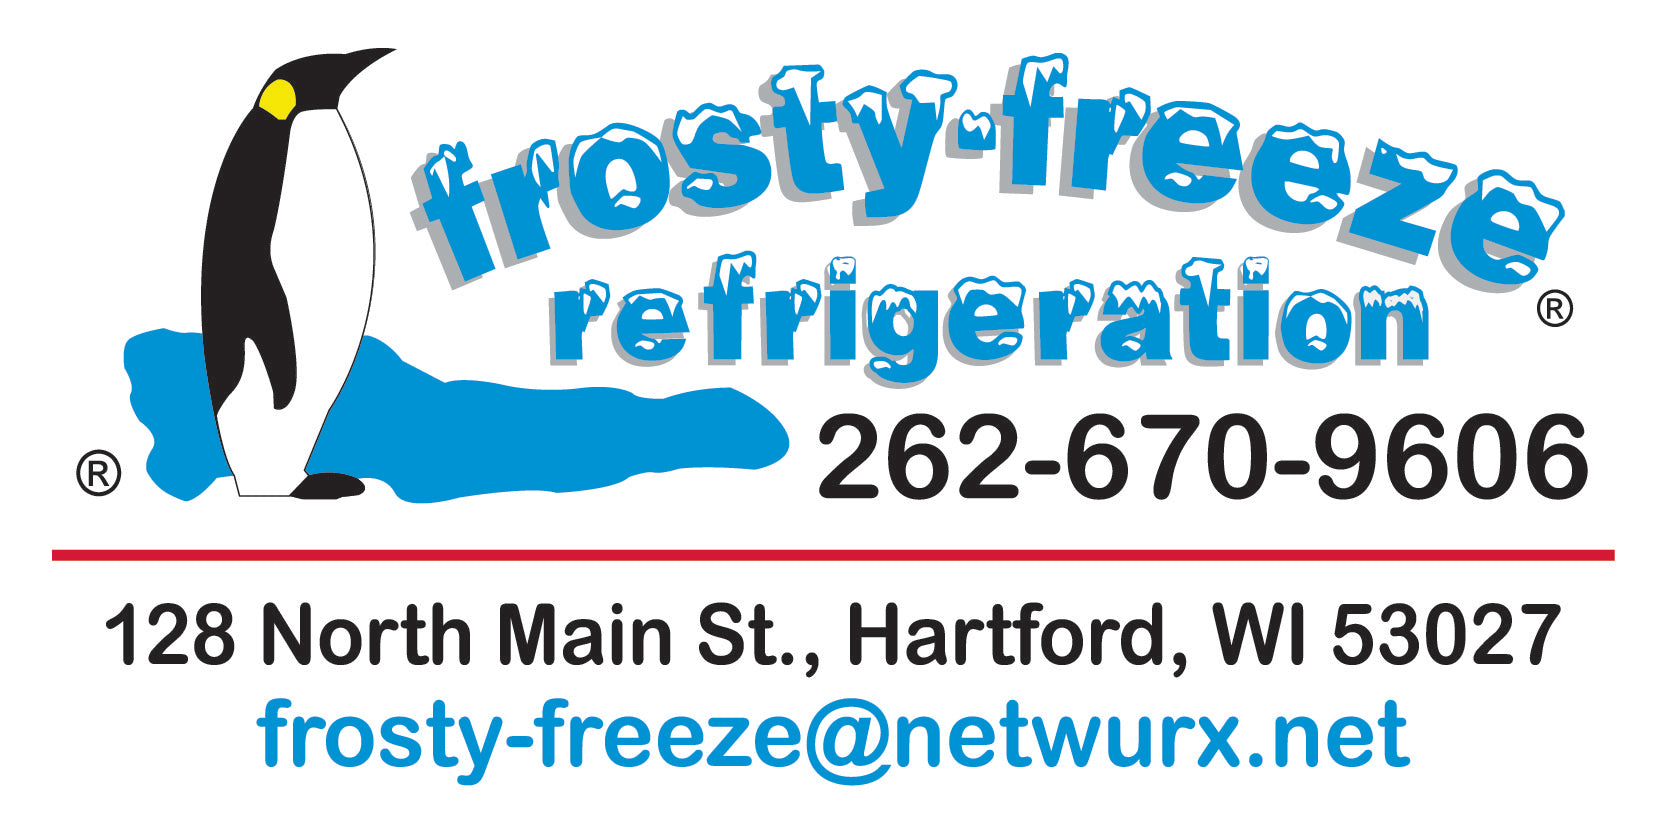 Refrigerant R600a (1) 6 oz. Can with Top Tap & Cap Kit – Frosty Freeze A/C  Products Company